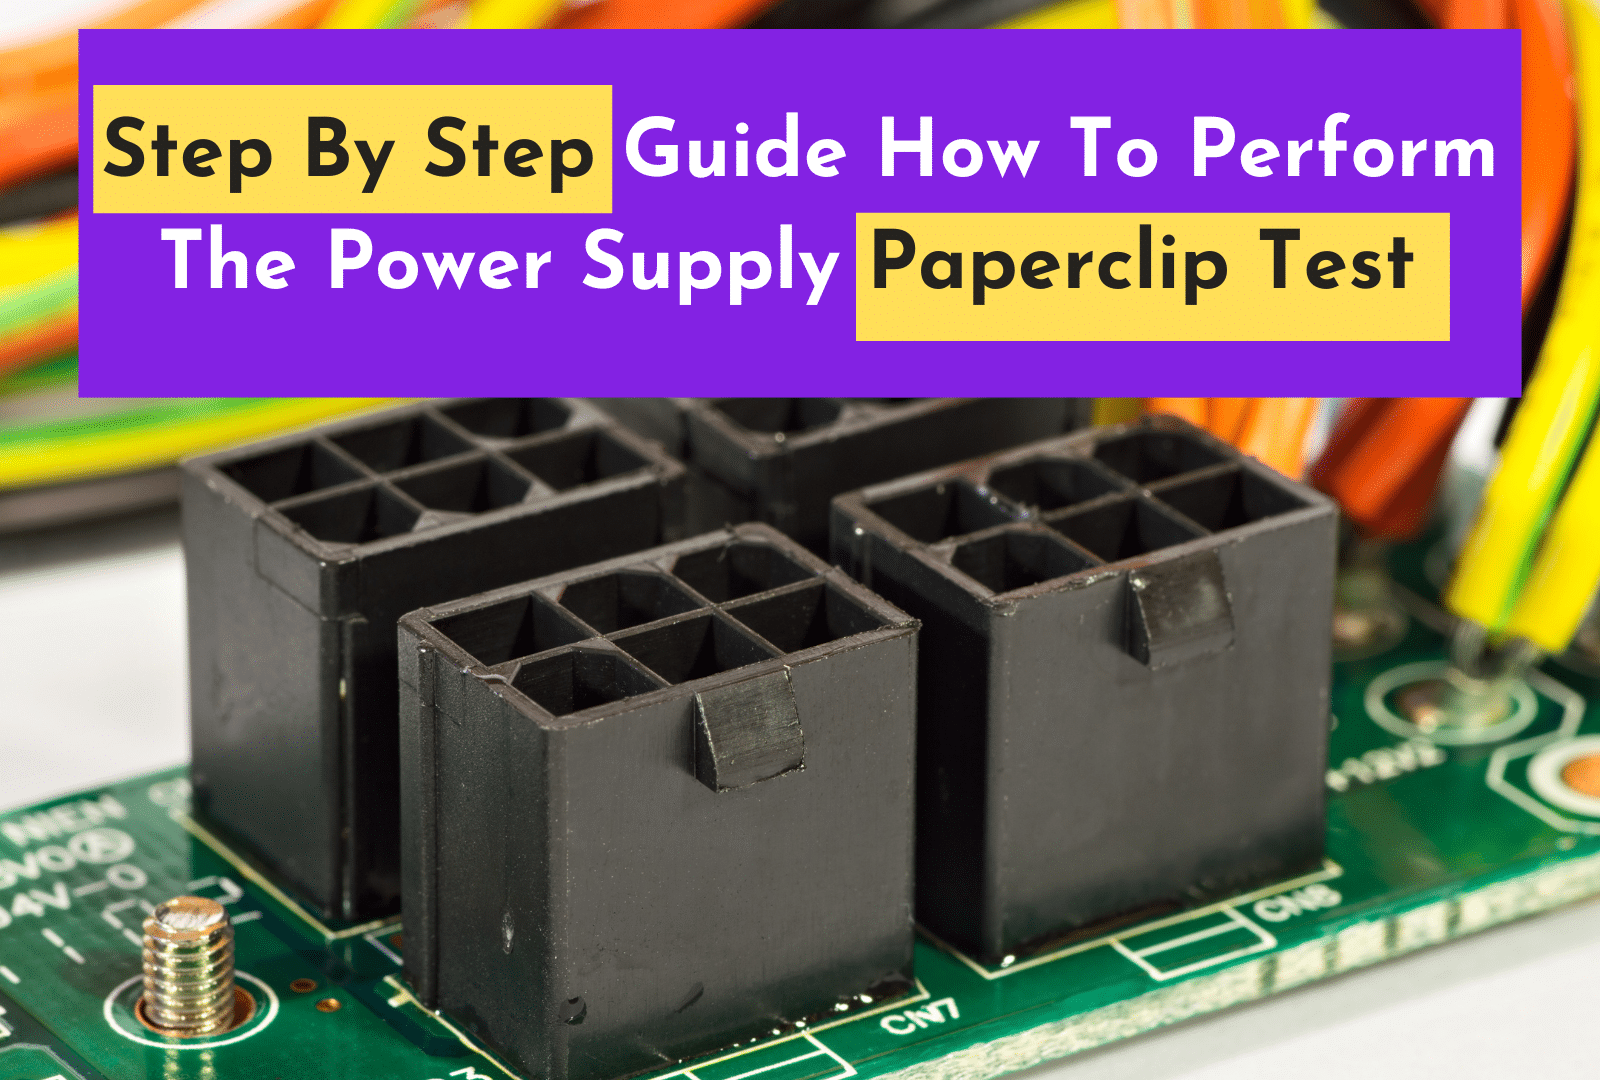 C:\Users\Mohsin\Downloads\Step By Step Guide How To Perform The Power Supply Paperclip Test.png